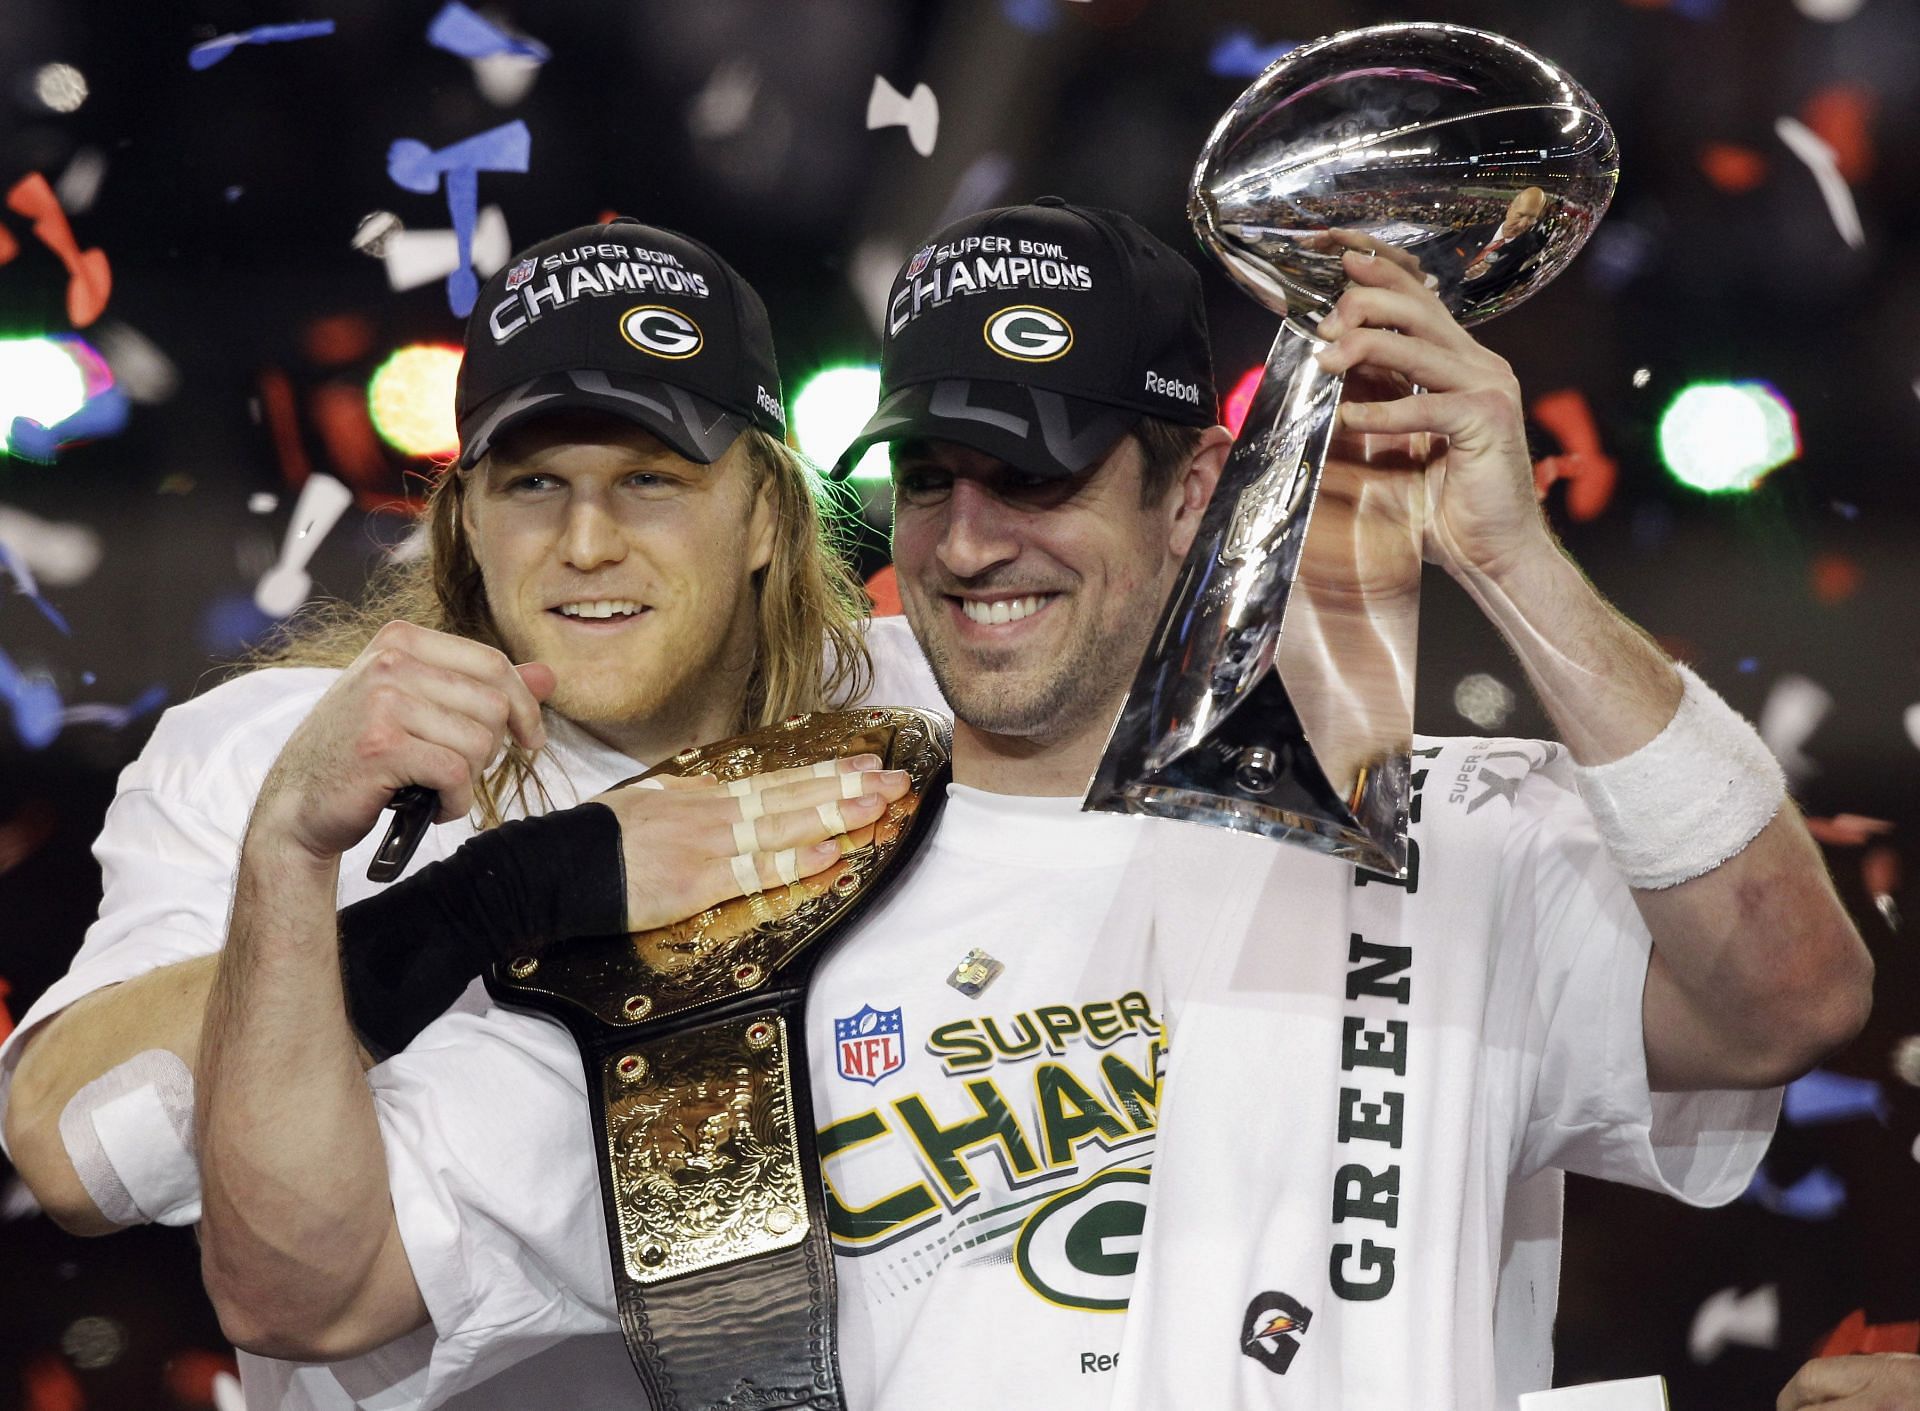 Packers QB Aaron Rodgers after winning SB XLV 31-25 over the Steelers